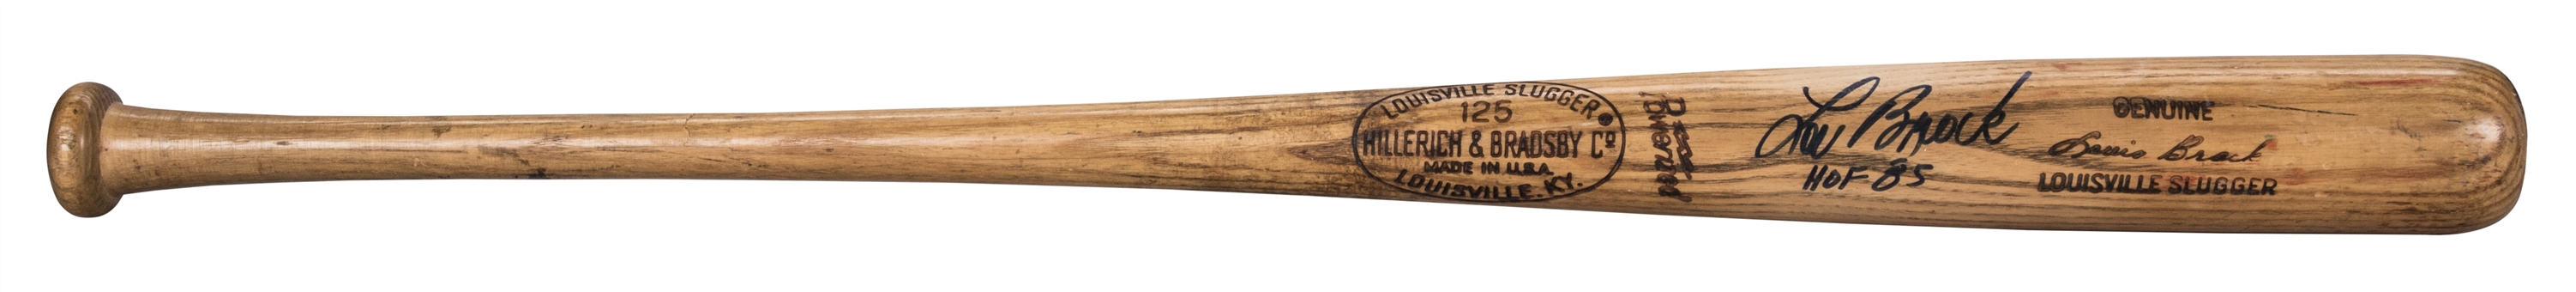 1969-71 Lou Brock Game Used, and Signed and Inscribed Hillerich & Bradsby P89 Model Bat (PSA/DNA)